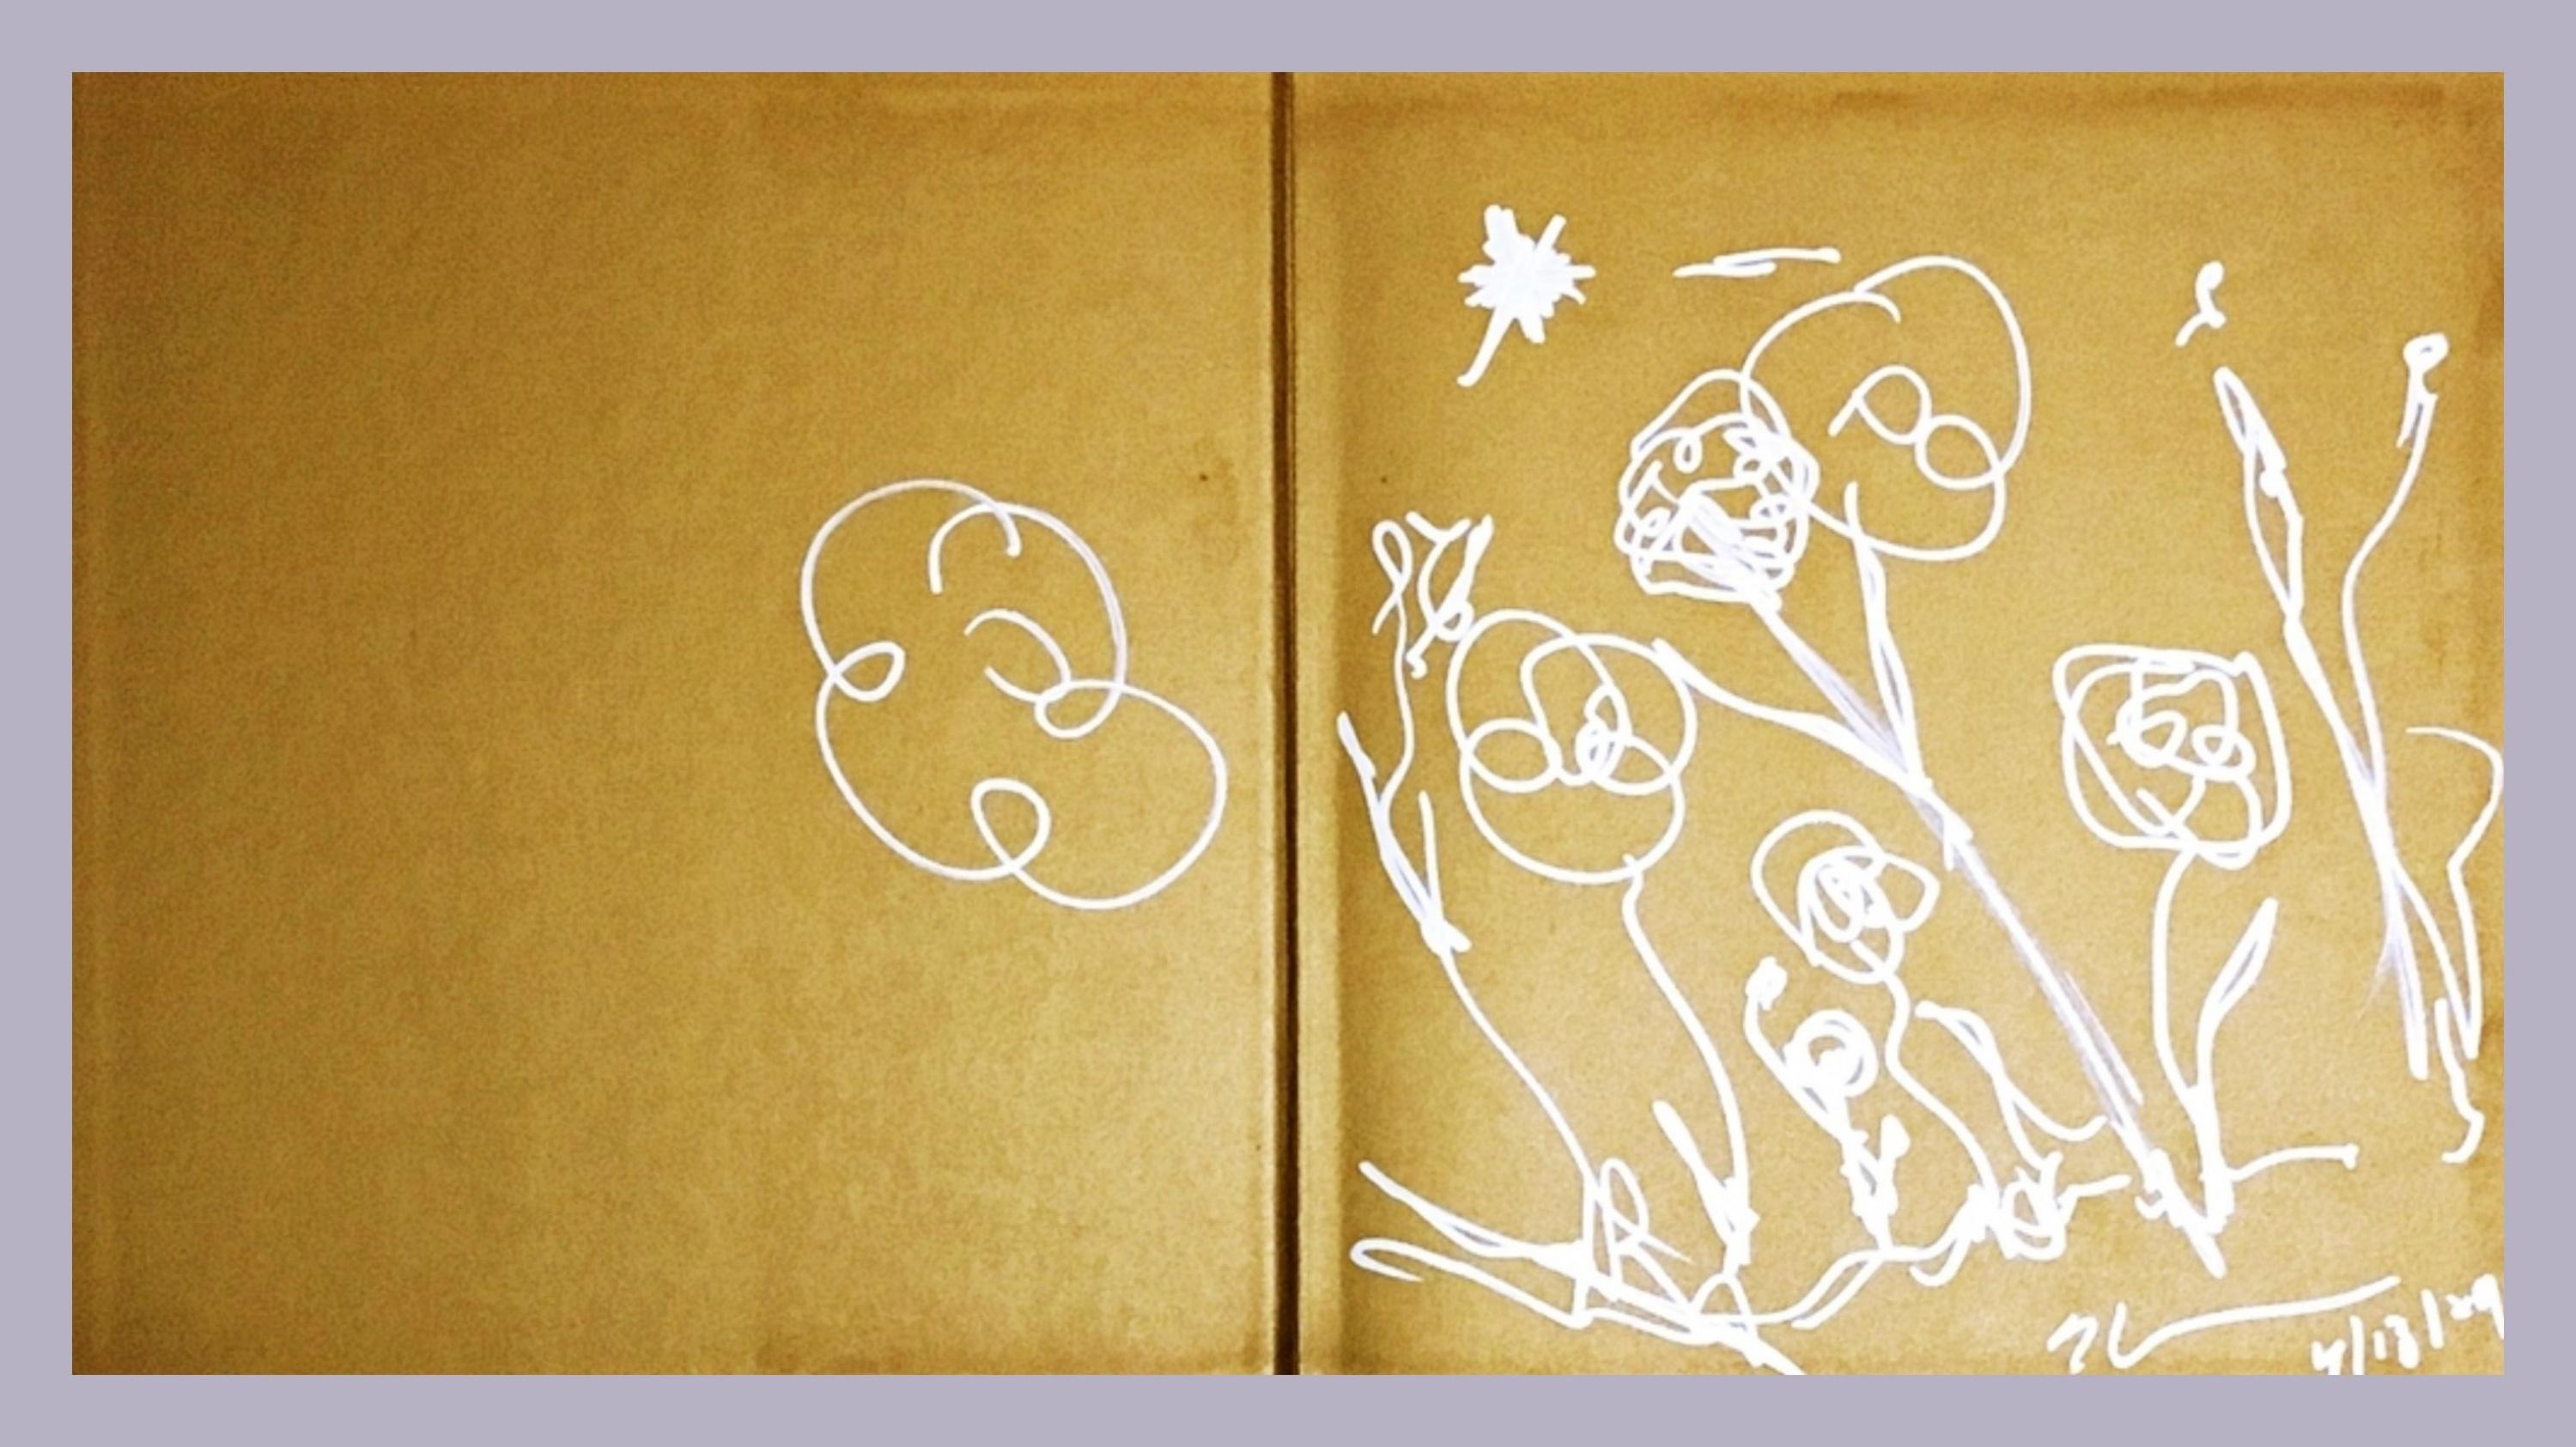 Jeff Koons Landscape Art - Flowers and sun drawing signed & dated in Versailles monograph Pop art landscape